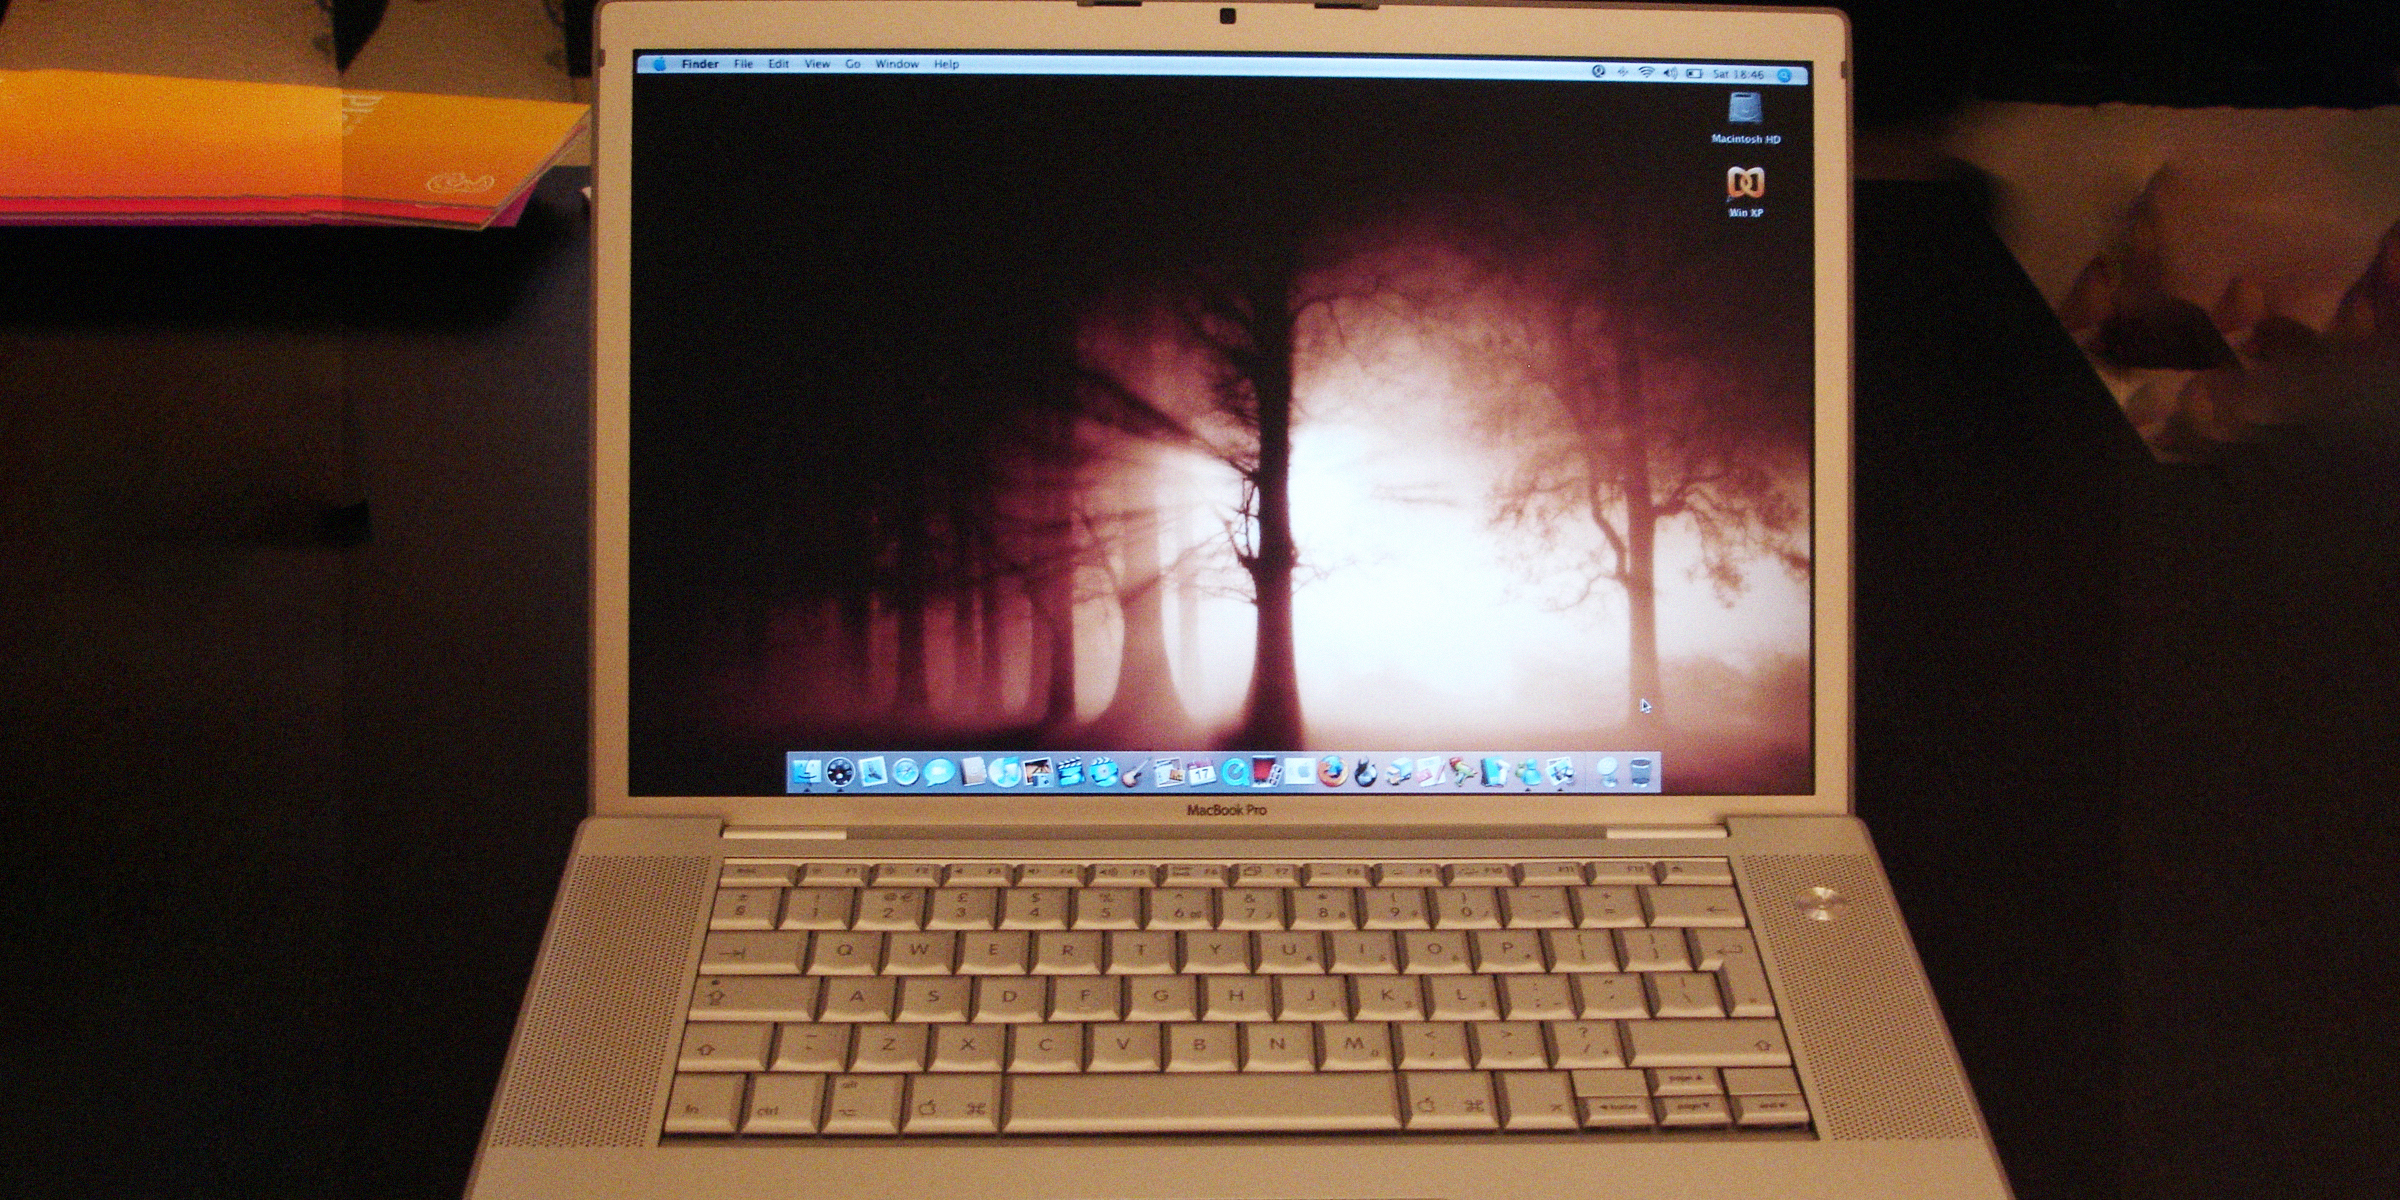 A laptop | Source: flickr.com/(CC BY 2.0) by Ian D